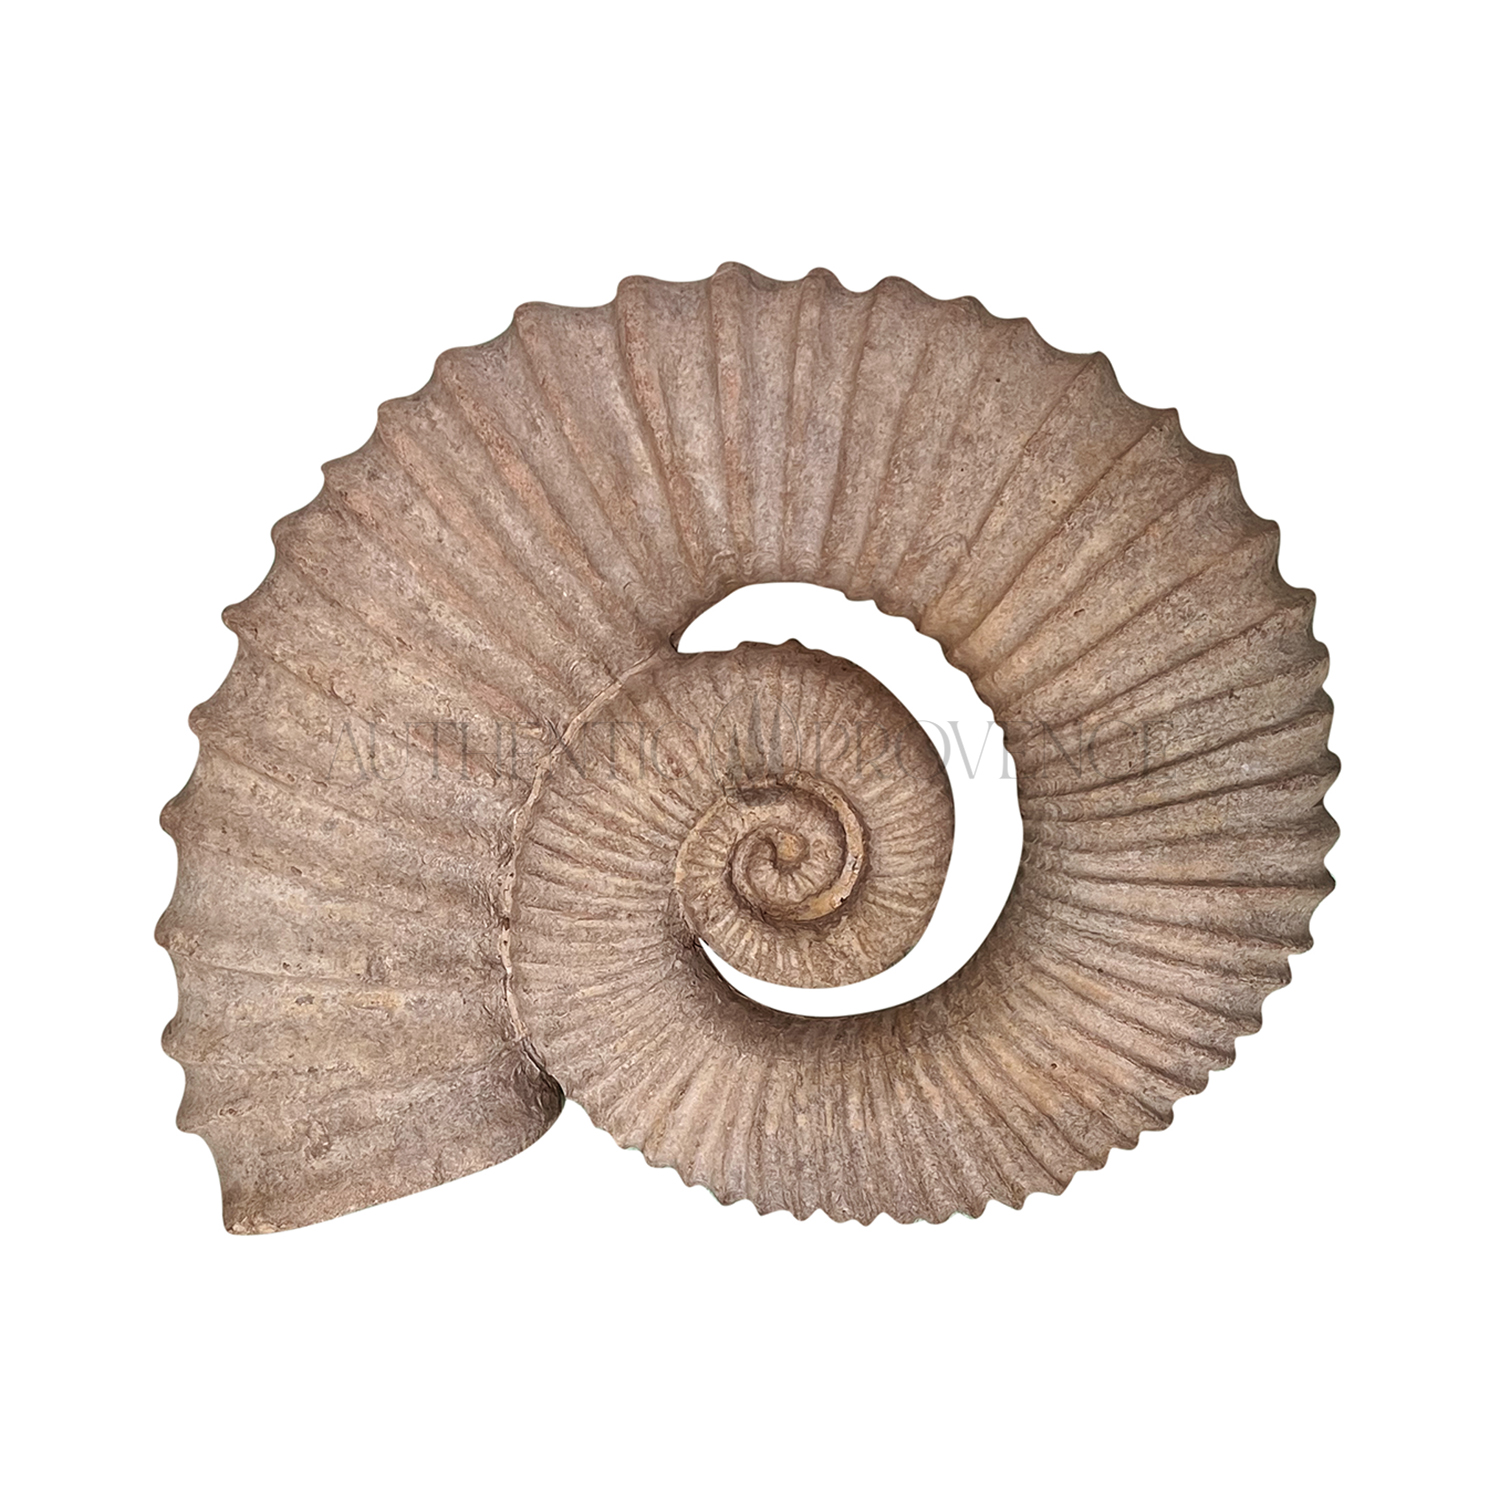 Vintage Shell Fossil